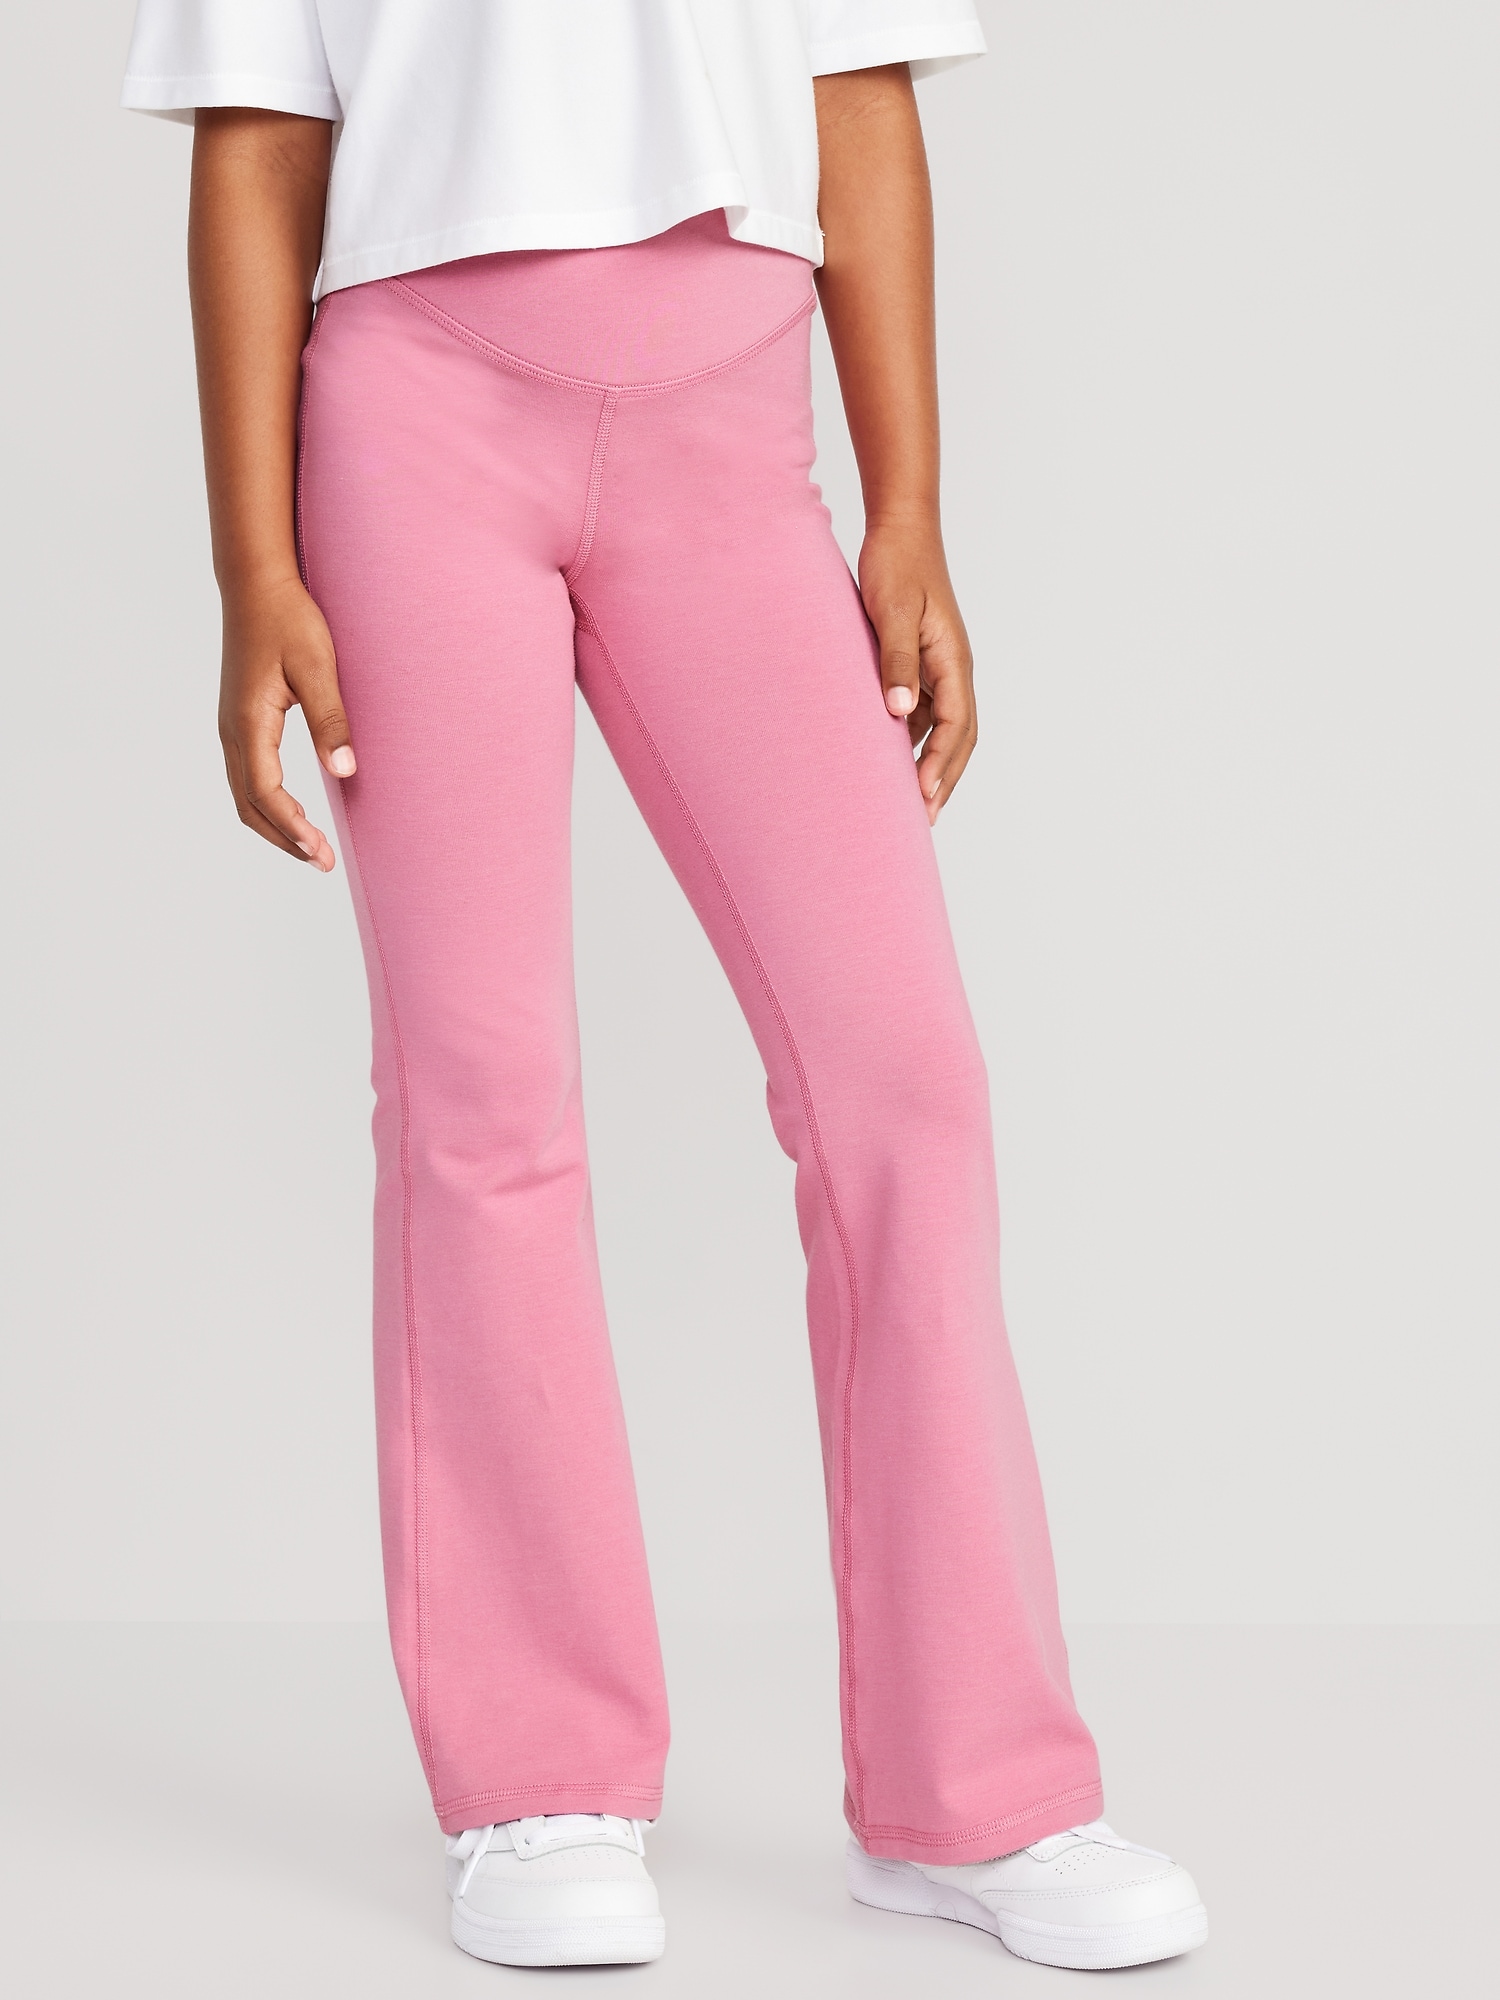 I got these Old Navy legging flares in every color they sold. :  r/FashionPlus